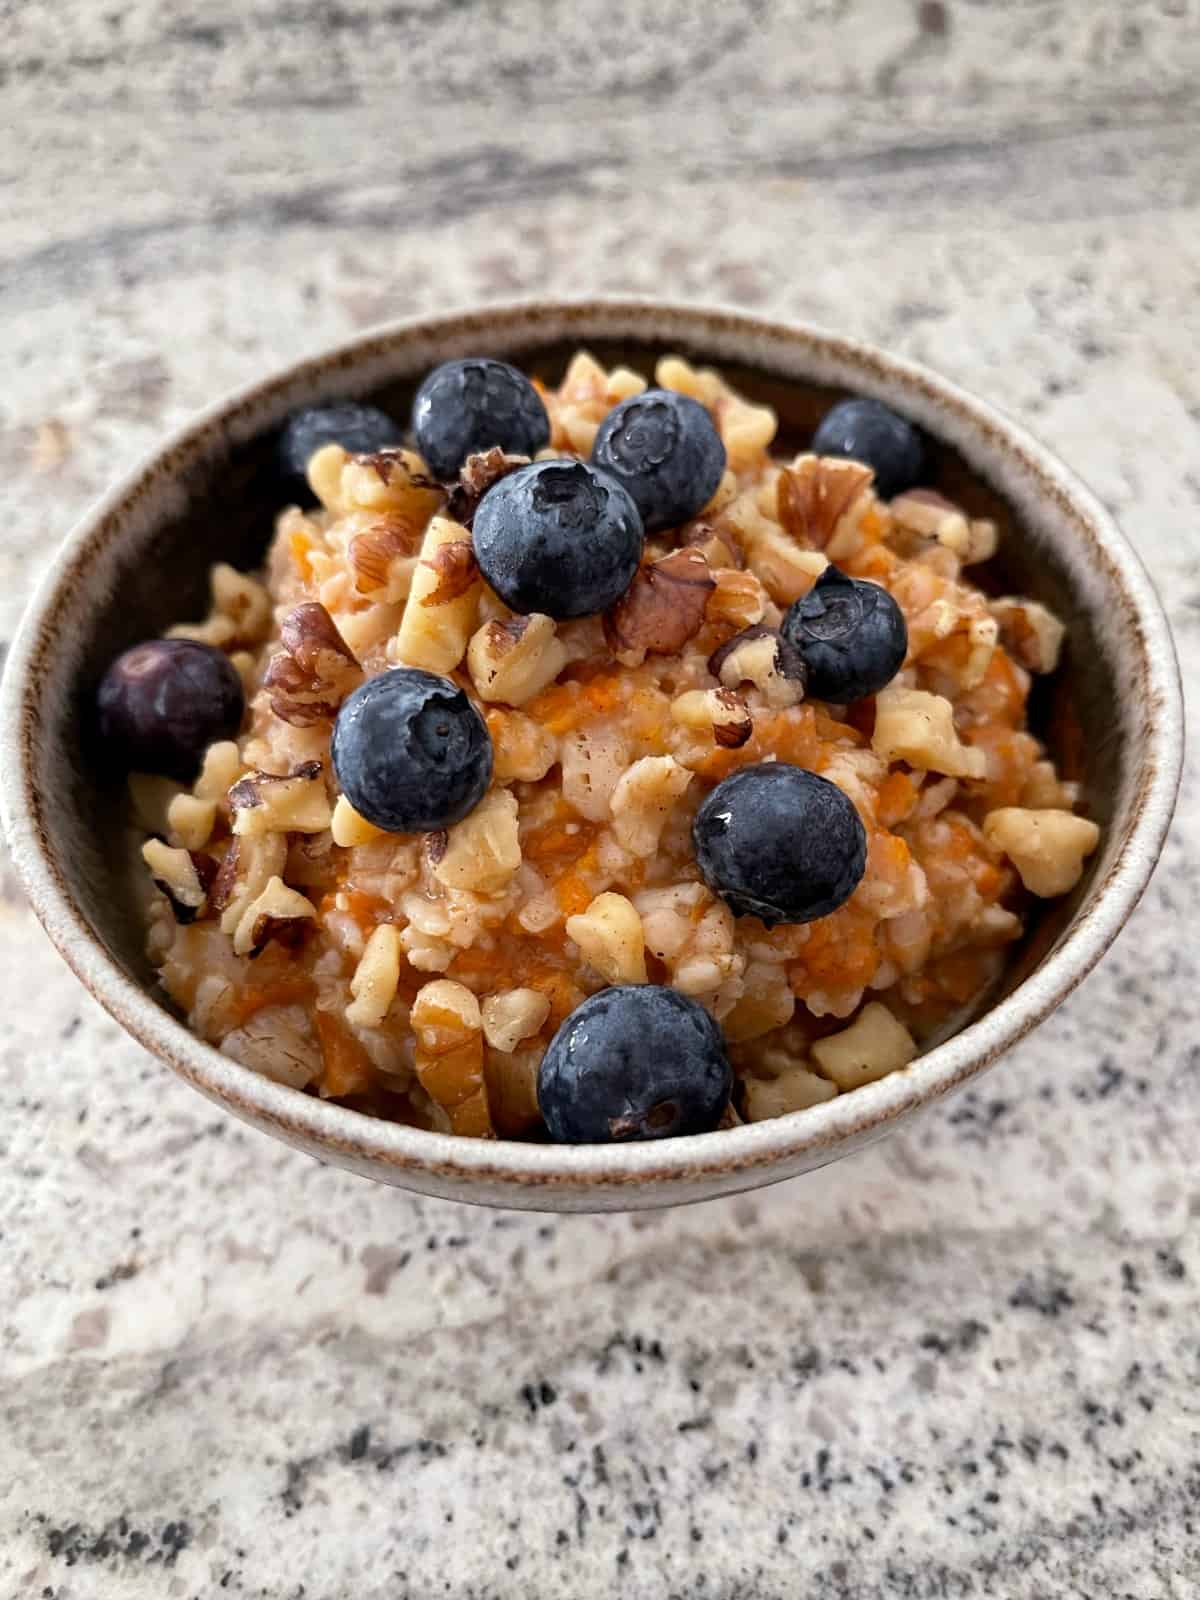 Carrot cake oatmeal topped with chopped walnuts and fresh blueberries in brown ceramic bowl.